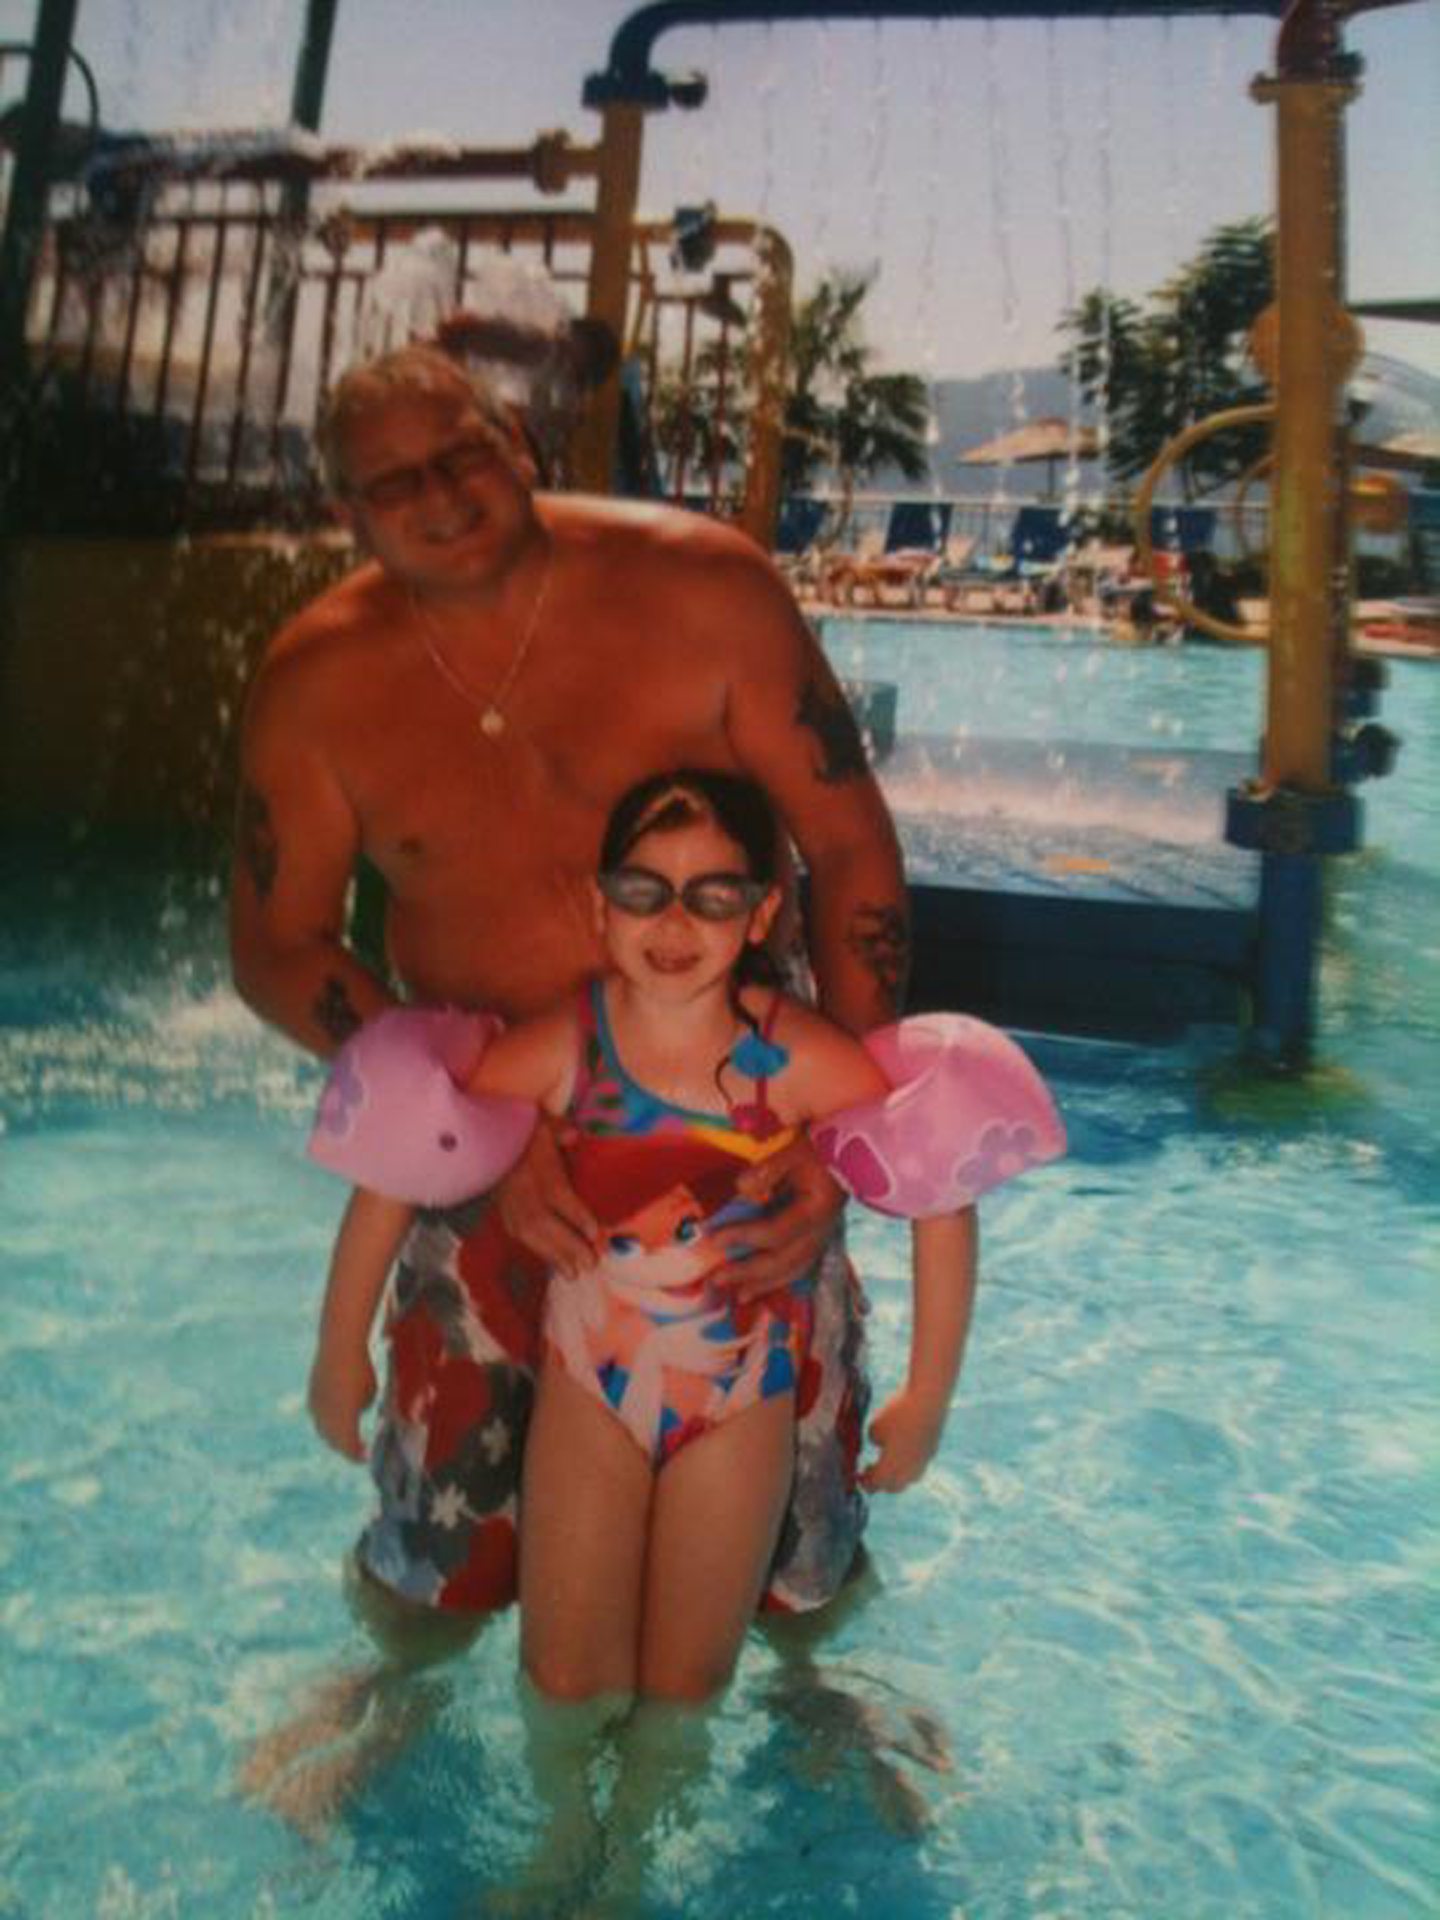 A holiday snap of Tommy in a pool with a grandchild.